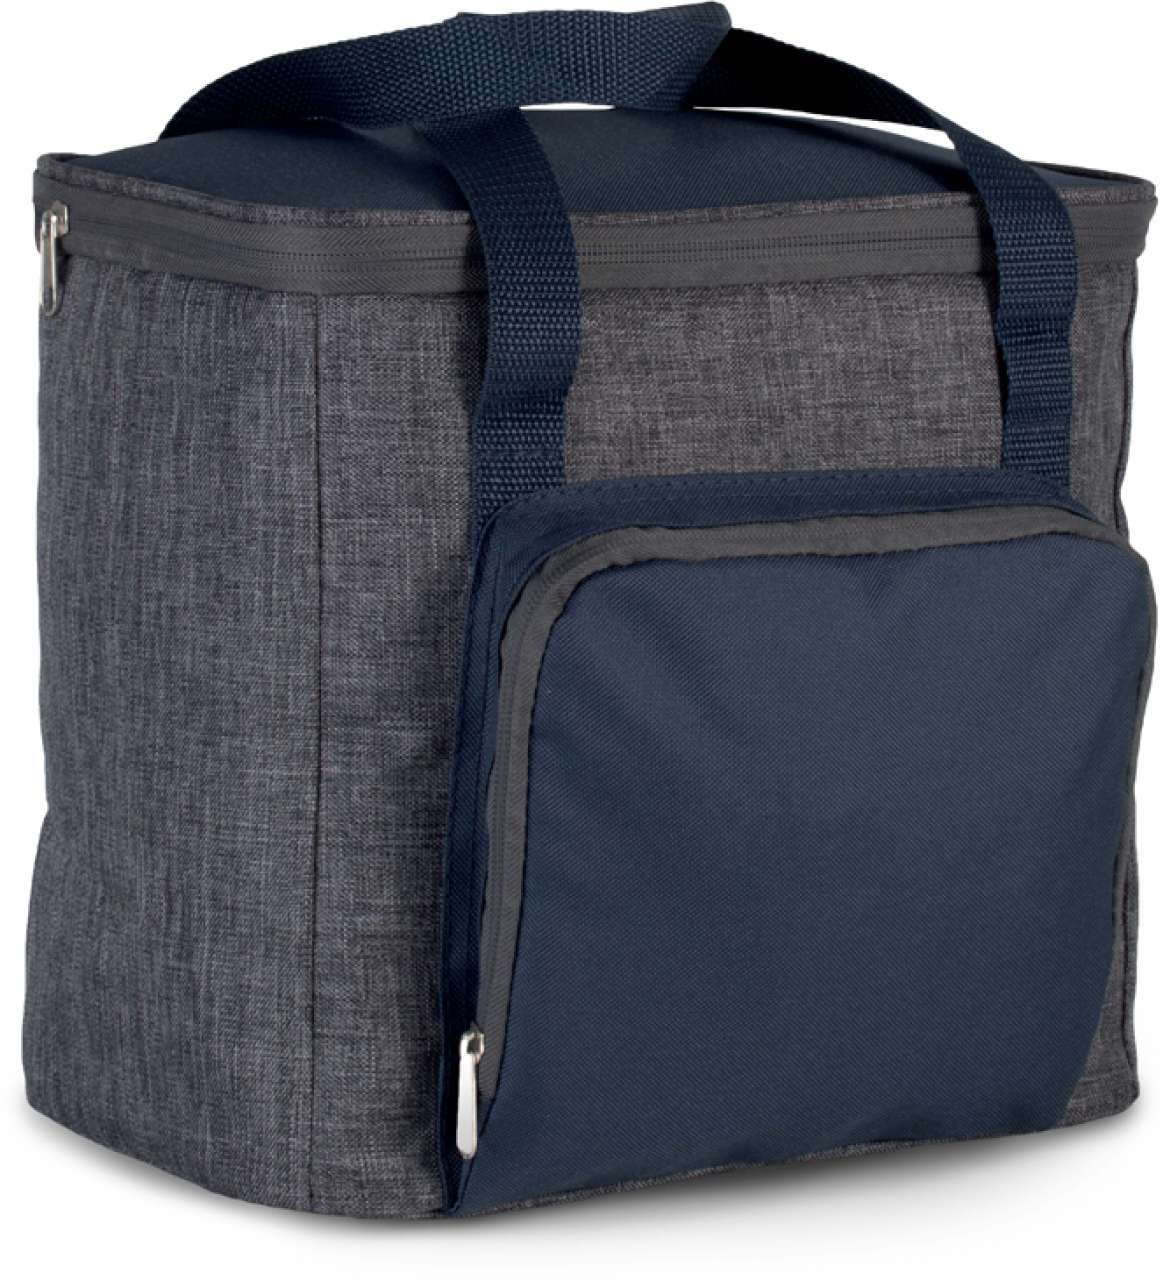 COOL BAG WITH ZIPPED POCKET